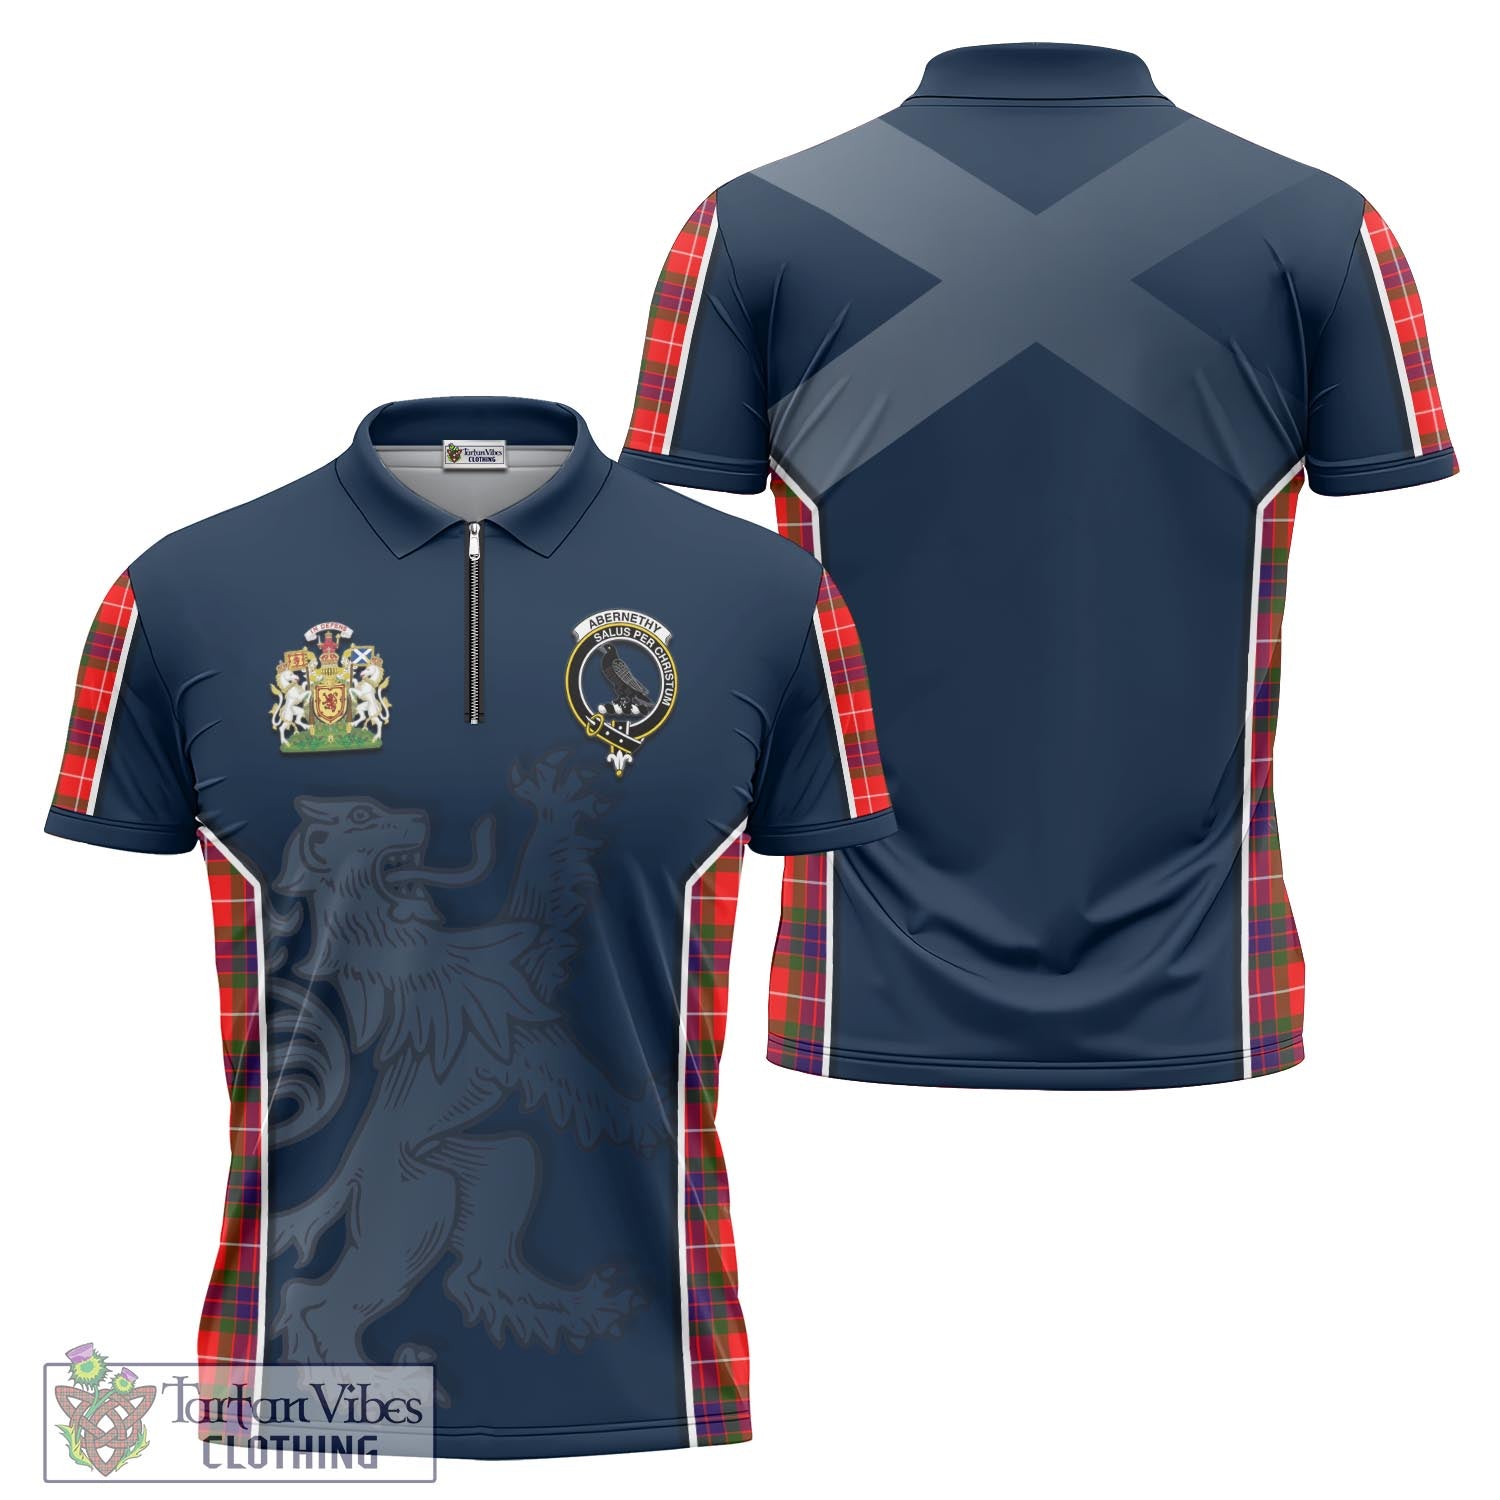 Tartan Vibes Clothing Abernethy Tartan Zipper Polo Shirt with Family Crest and Lion Rampant Vibes Sport Style